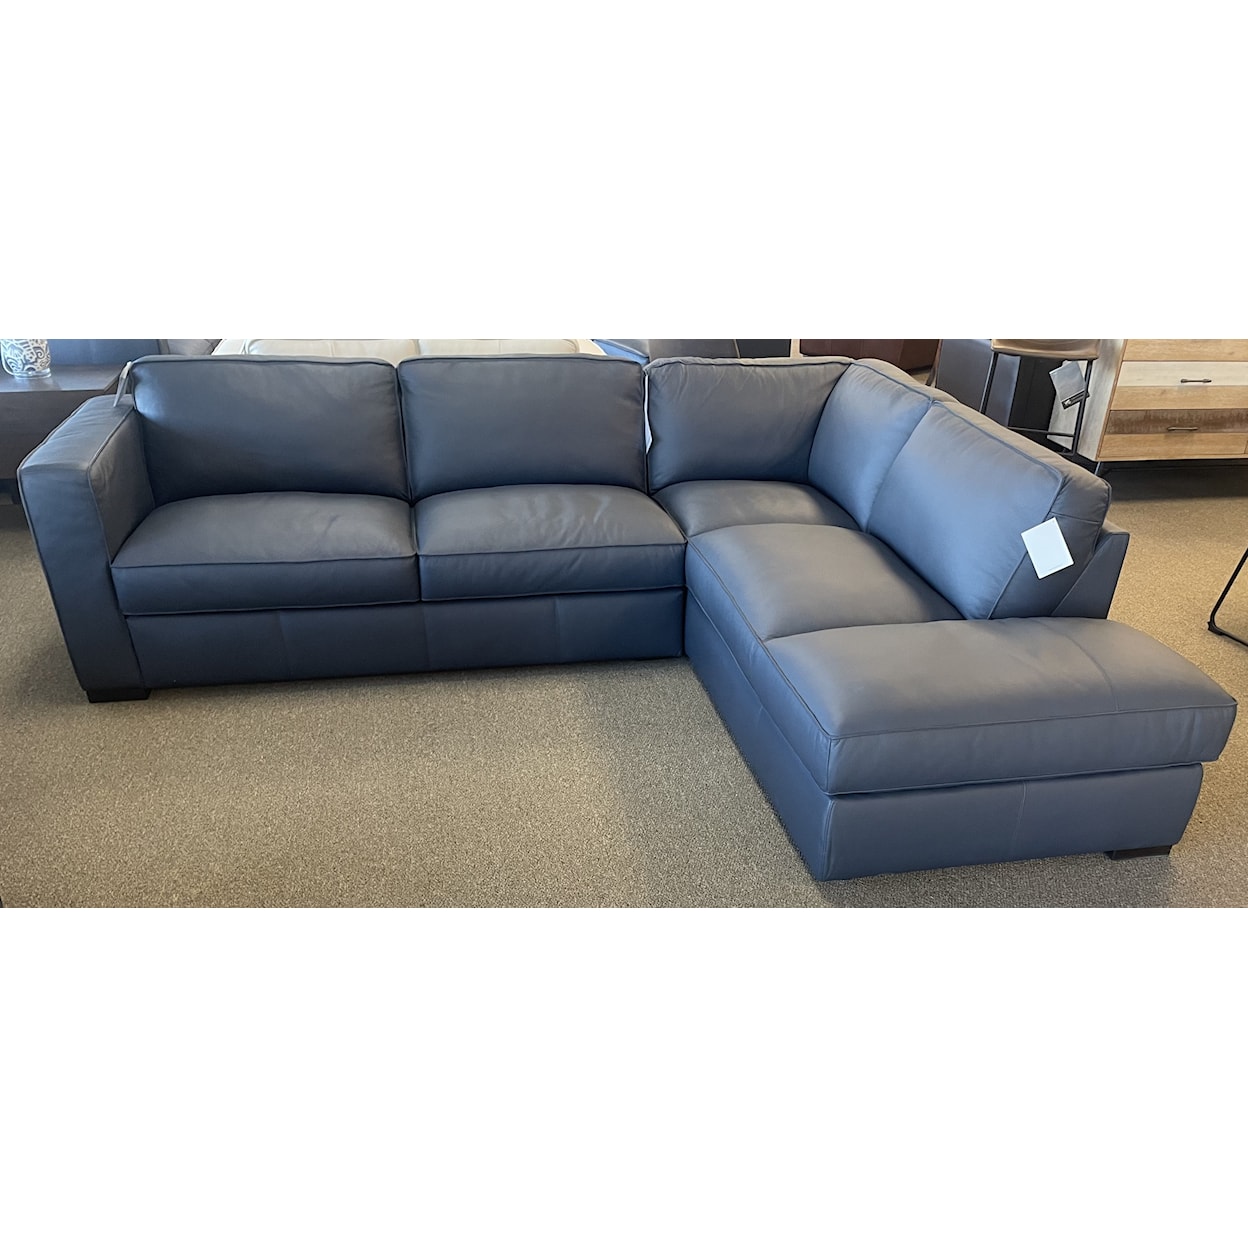 Natuzzi Editions C274 Leather Collection Navy Leather Sectional